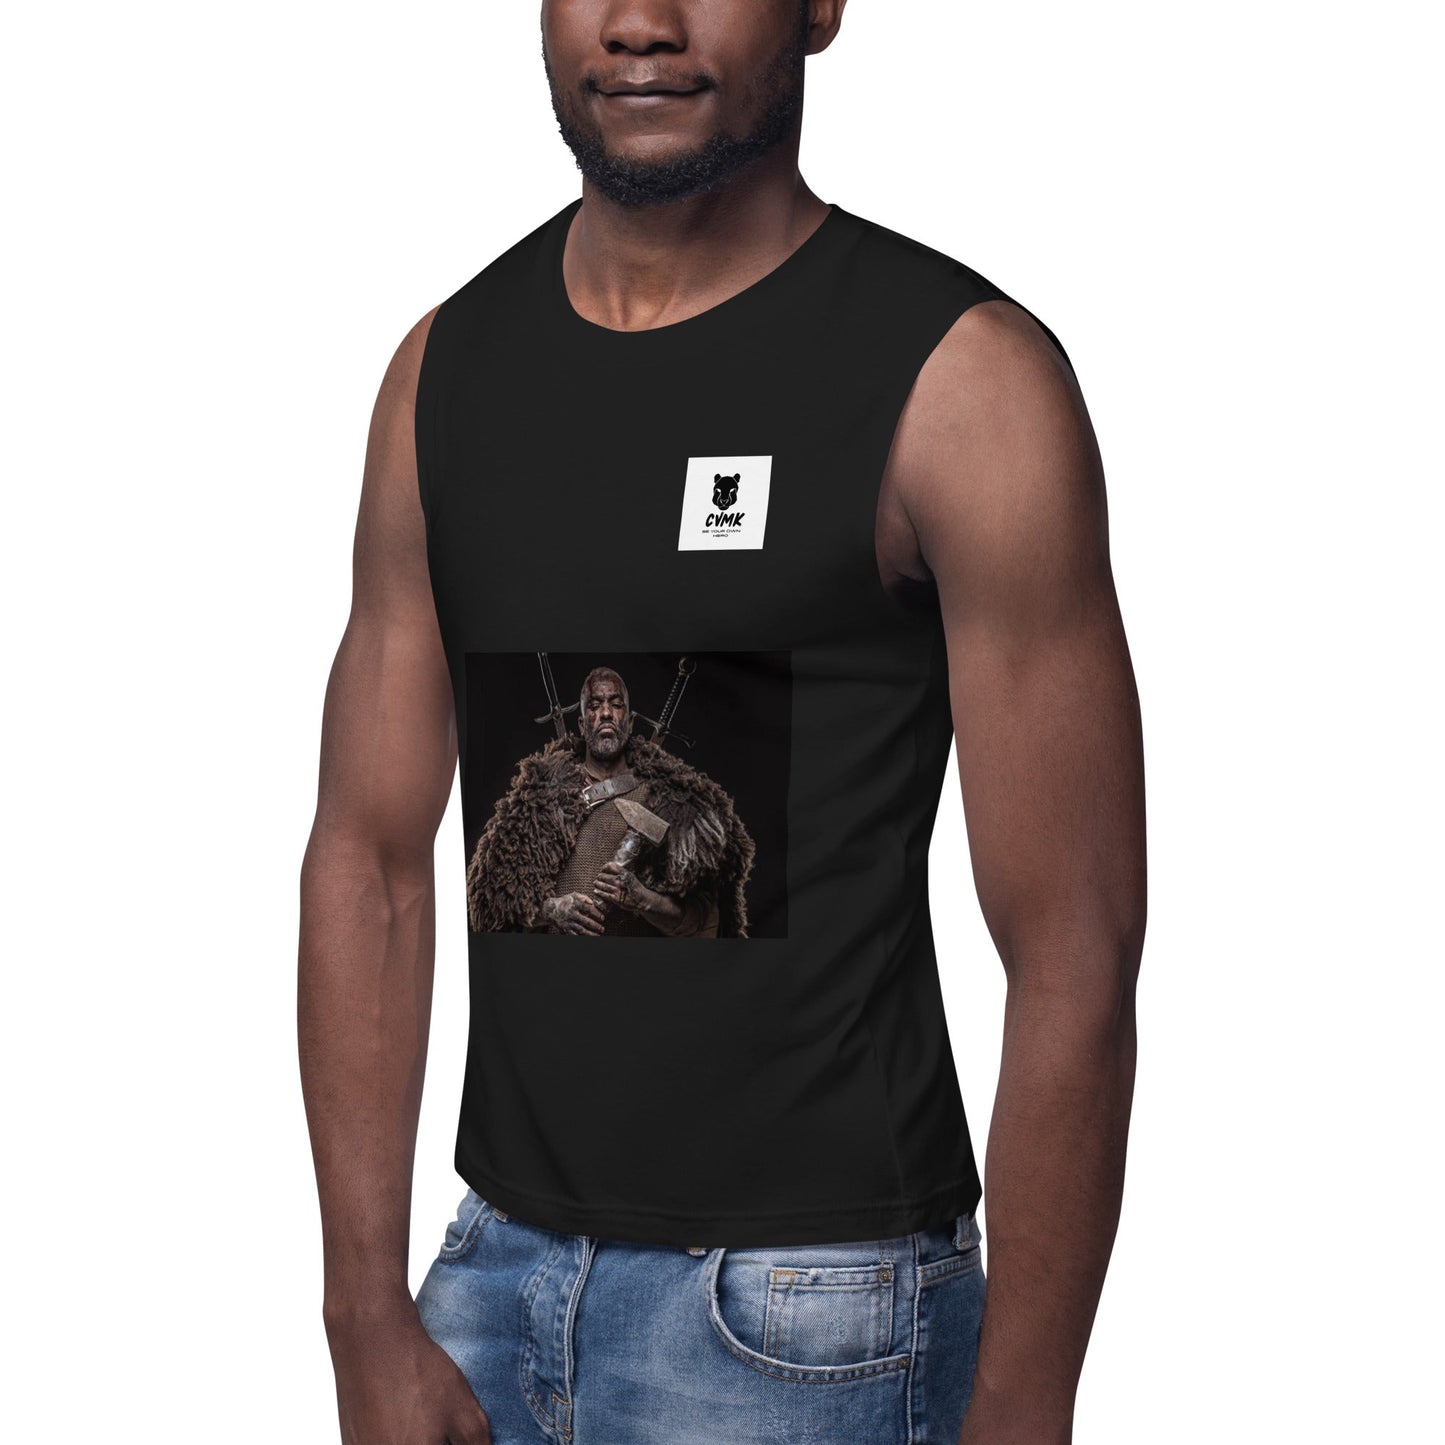 The H.I.M. Tank Top